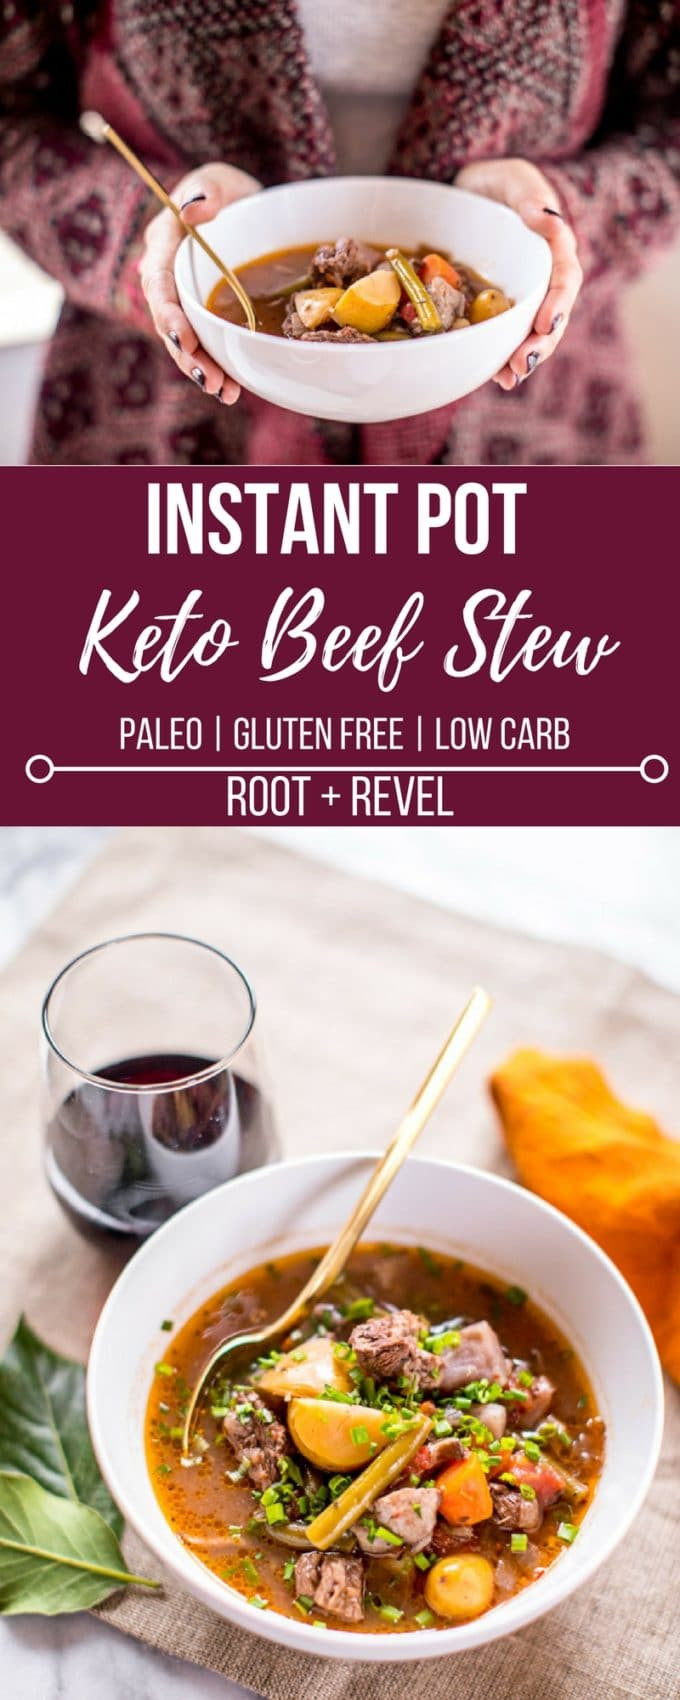 Instant Pot Low Fat Recipes
 Keto Beef Stew in the Instant Pot or Slow Cooker